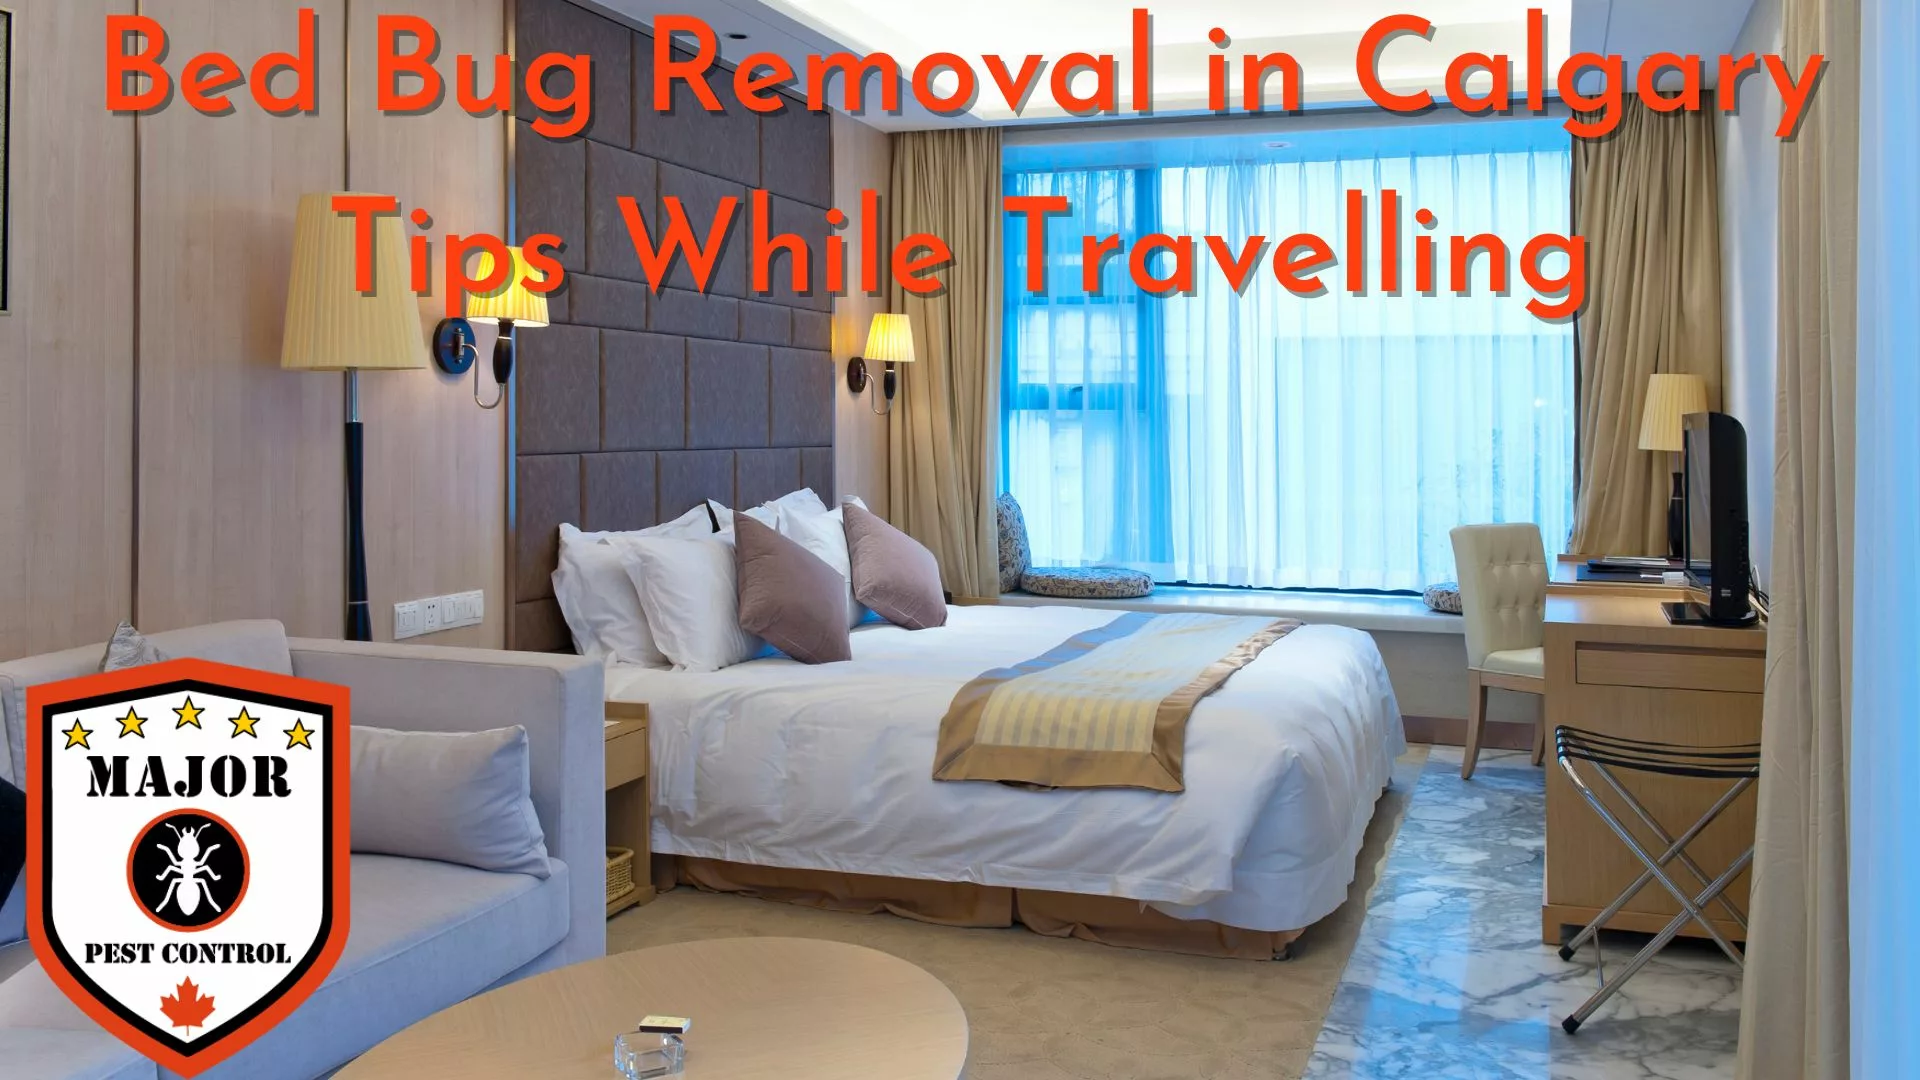 Bed Bug Removal in Calgary Tips by Major Pest Control Calgary